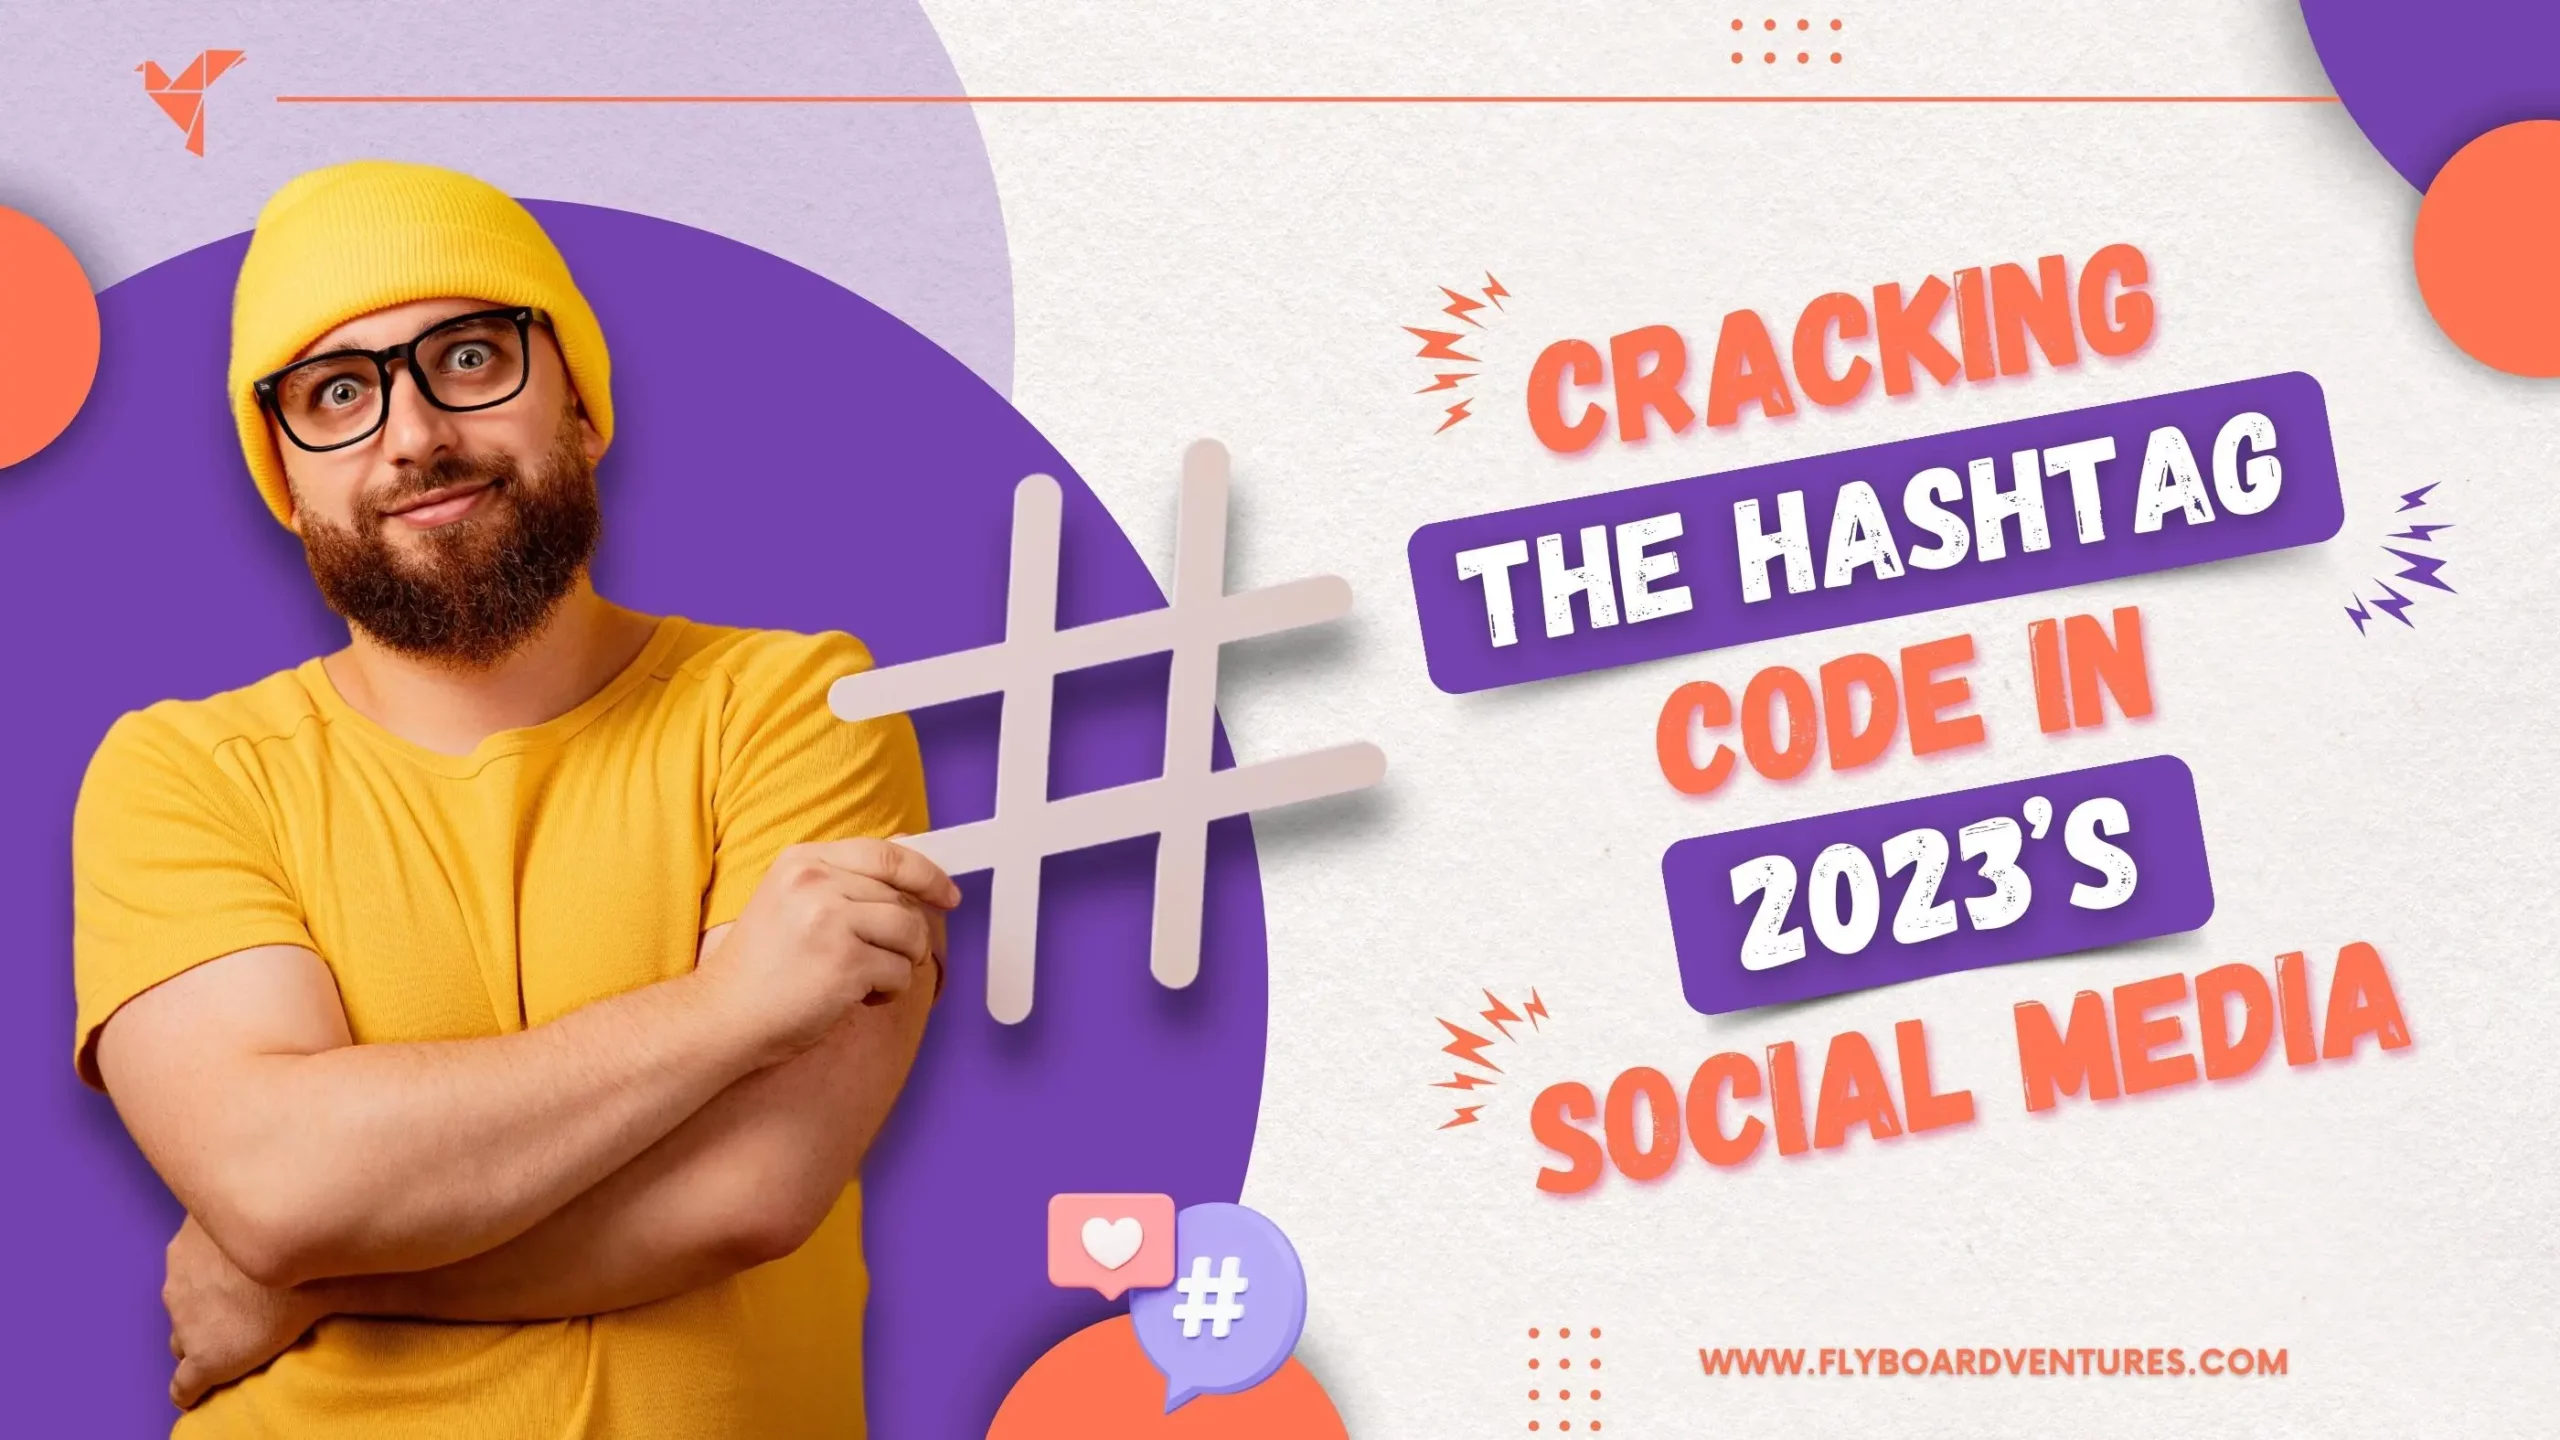 Cracking The Hashtag Code In 2023’s Social Media